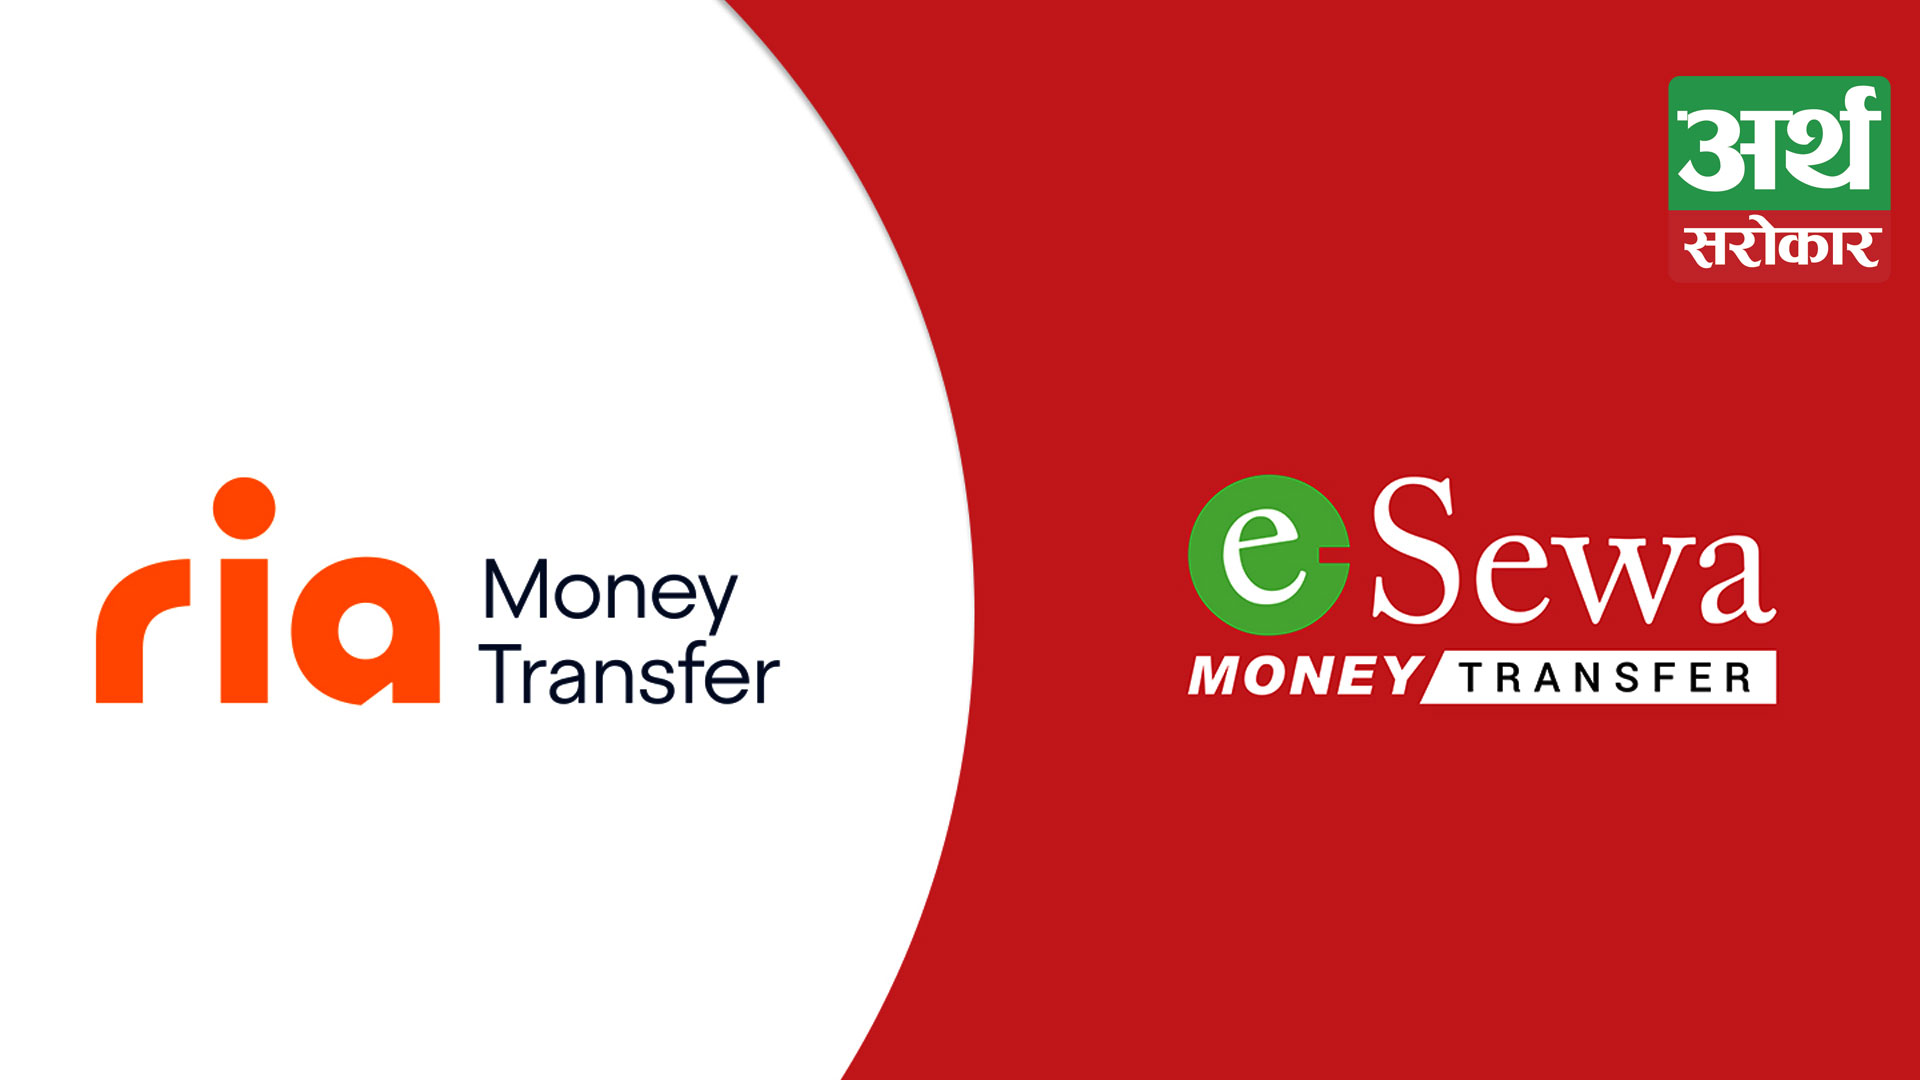 eSewa Money Transfer partners with Ria to offer mobile wallet enabled cross border remittance service to Nepal